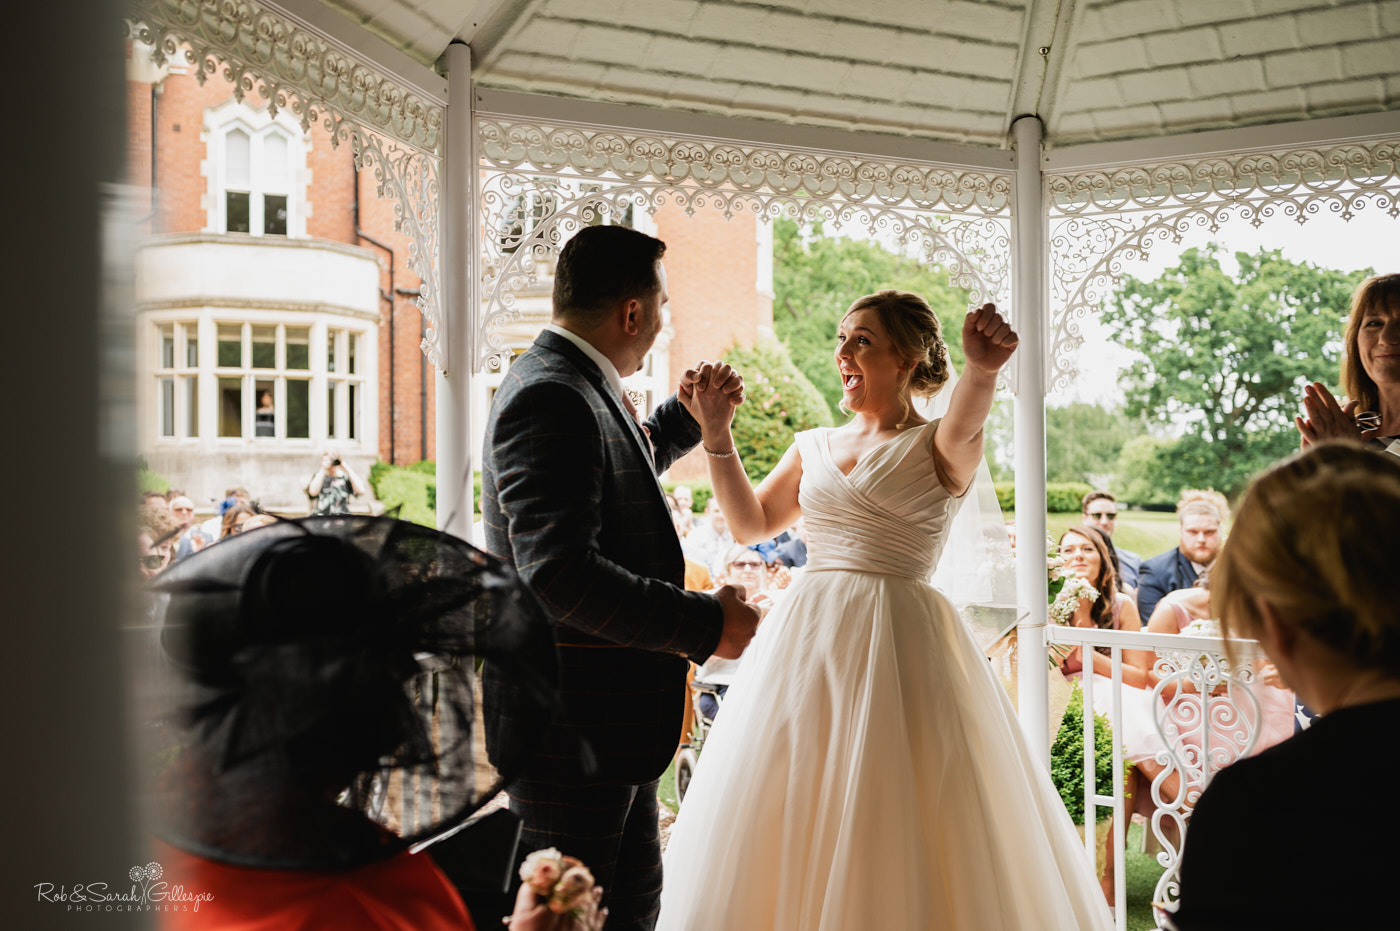 Outdoor wedding ceremony at Pendrell Hall in Staffordshire